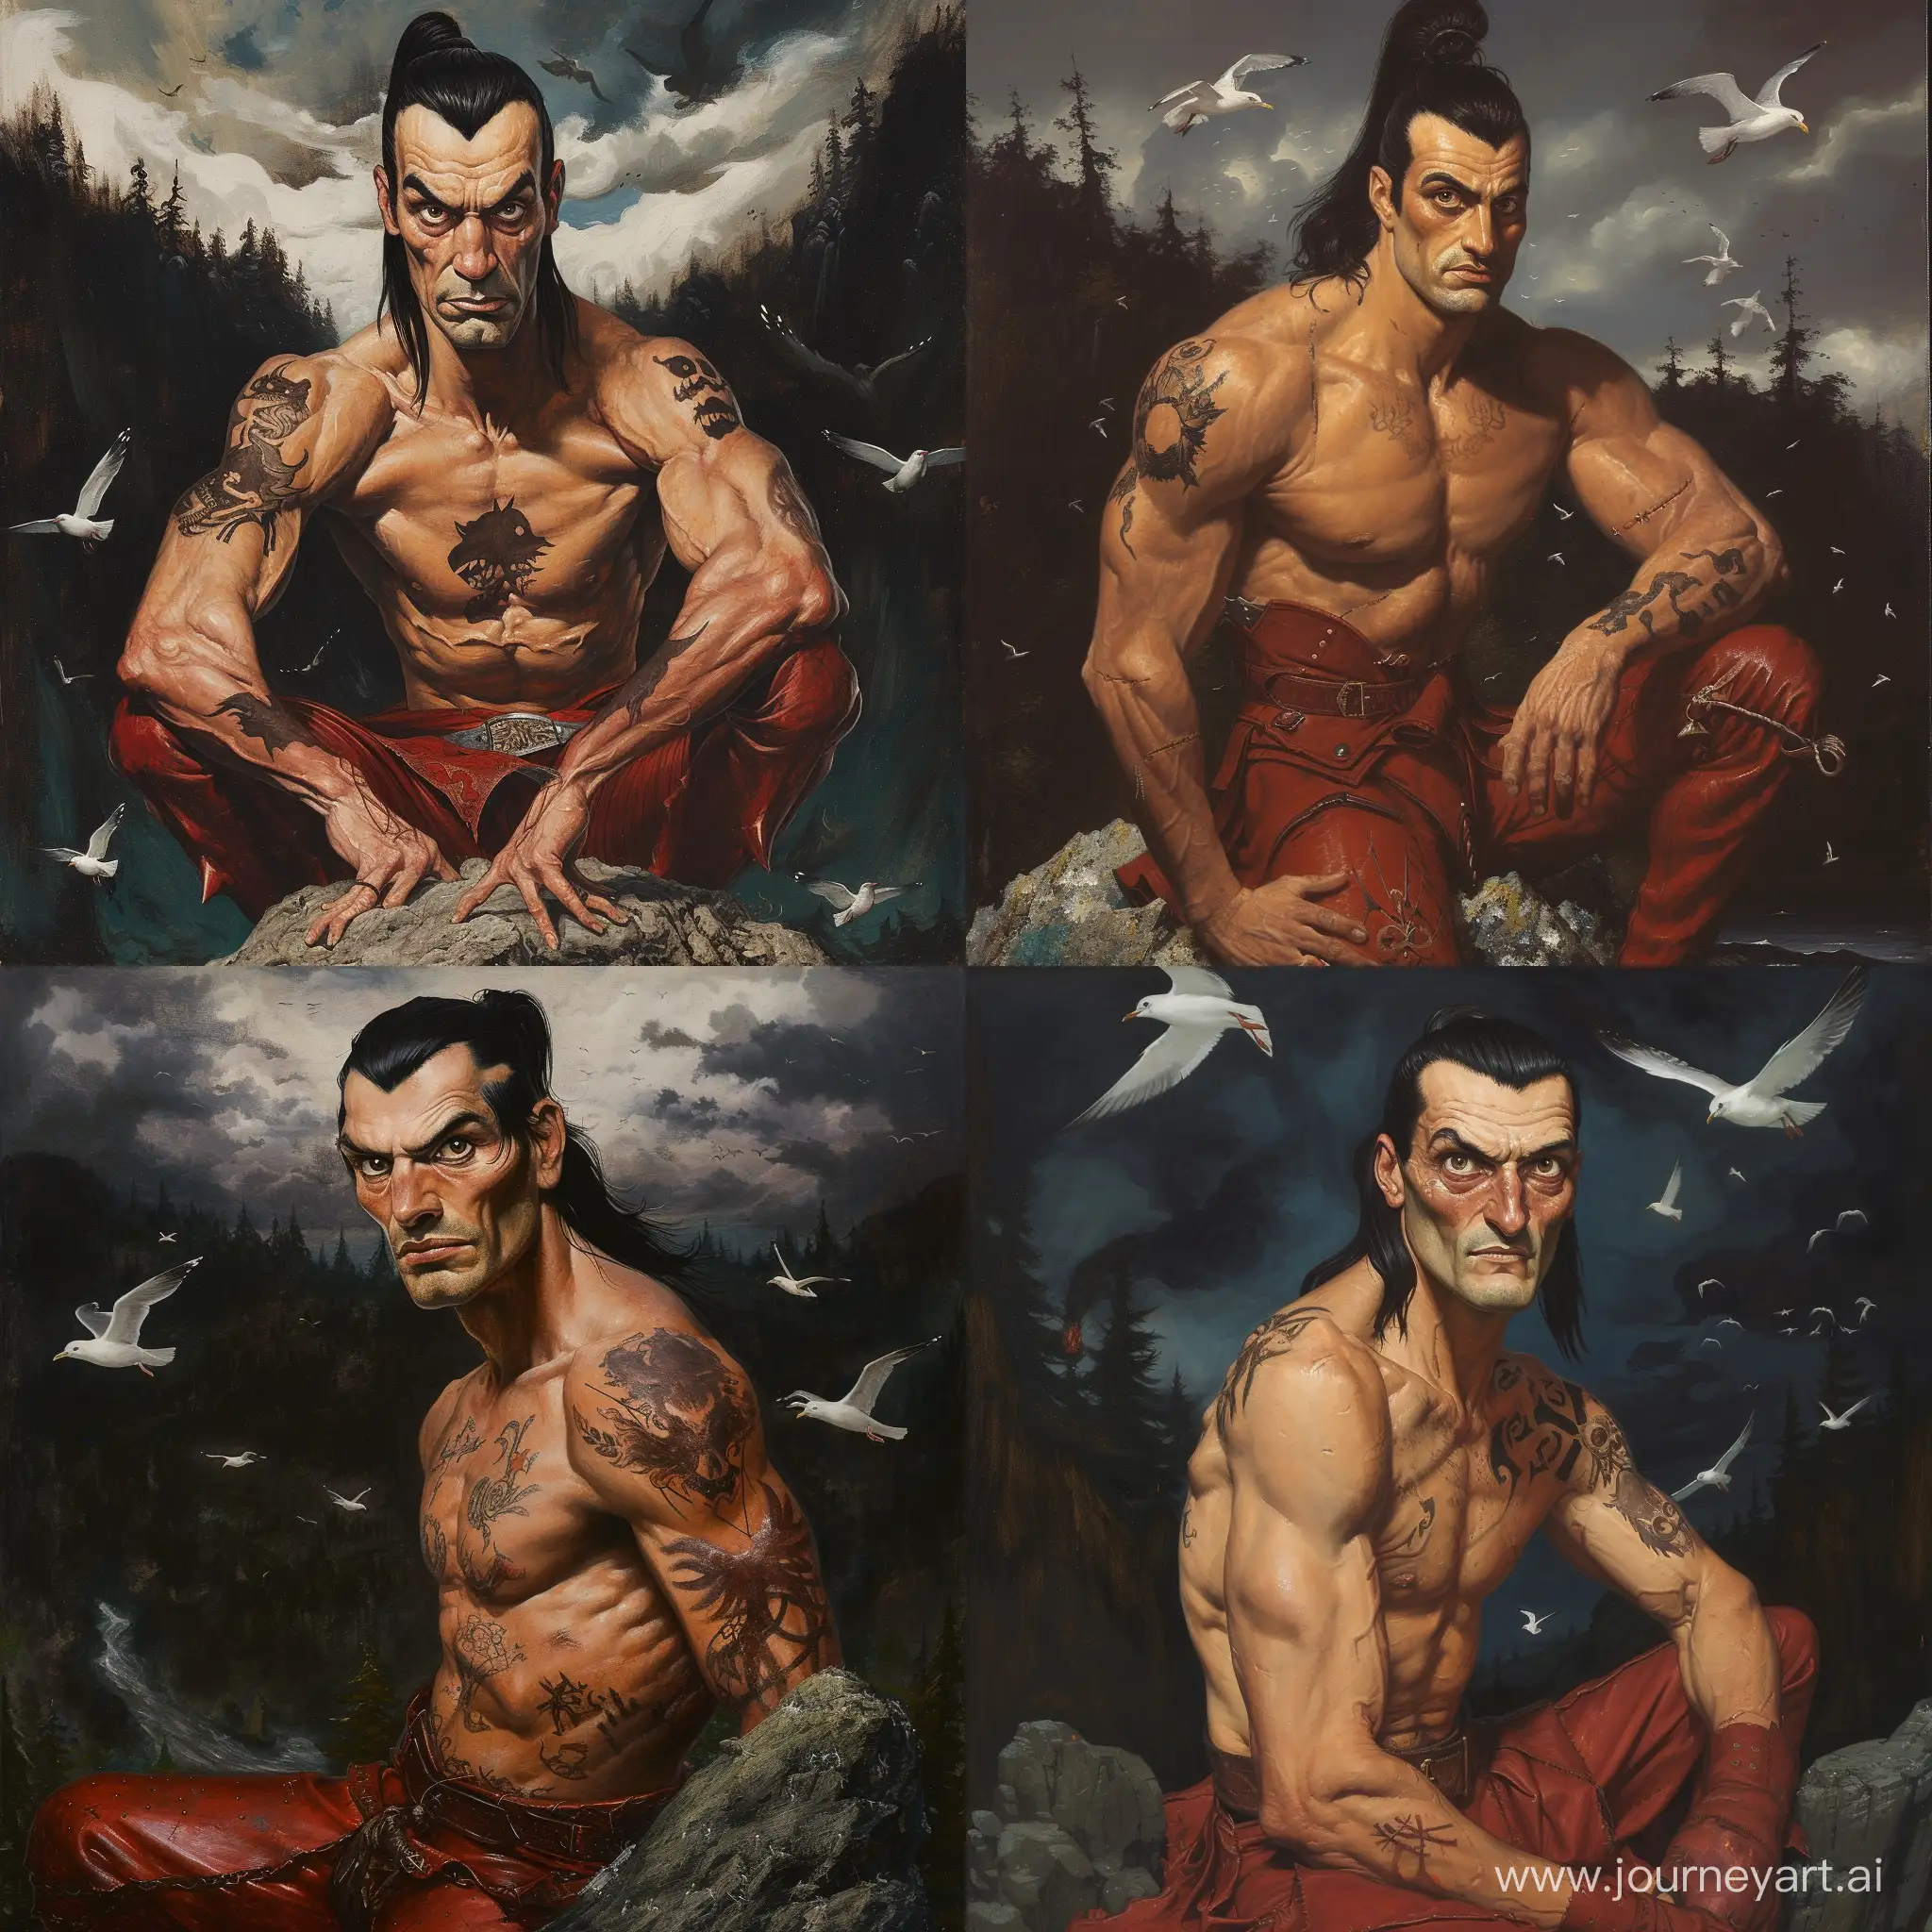 Oil painting in the style of Frank Frazetta, German art. full-length portrait of a muscular medieval Spanish bandit. He has a black ponytail, is trim and athletic. He has large brown eyes, bushy eyebrows, thin lips and a slight scowl. He is dressed in red-leather clothing, covered in black tattoos, has defined abs and long muscular legs. He sits on the rock of a flying island high above the sky. Behind him is a dark forest. eagulls are flying around him, oil painting